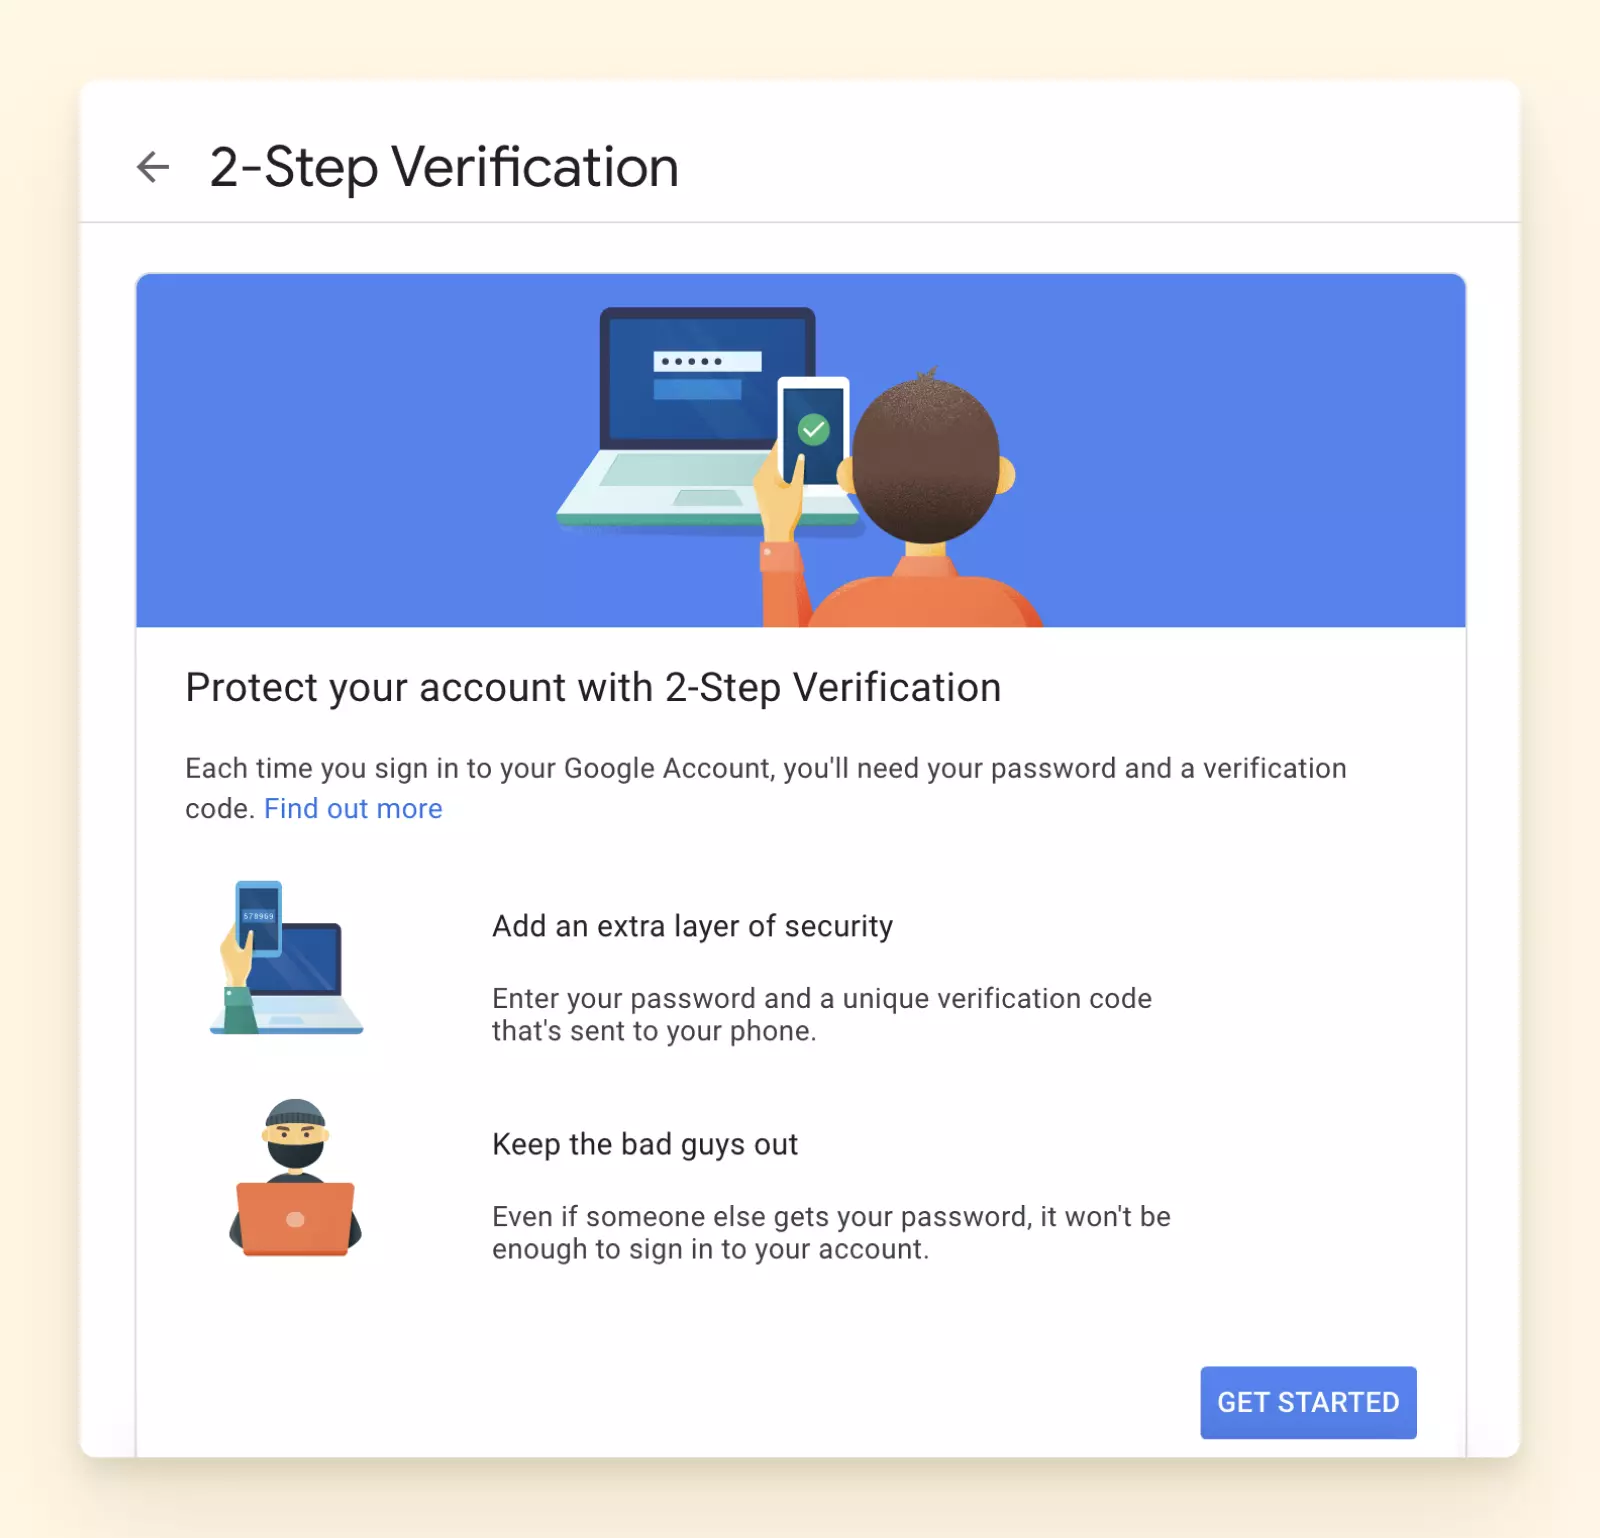 The process of enabling 2-step verification